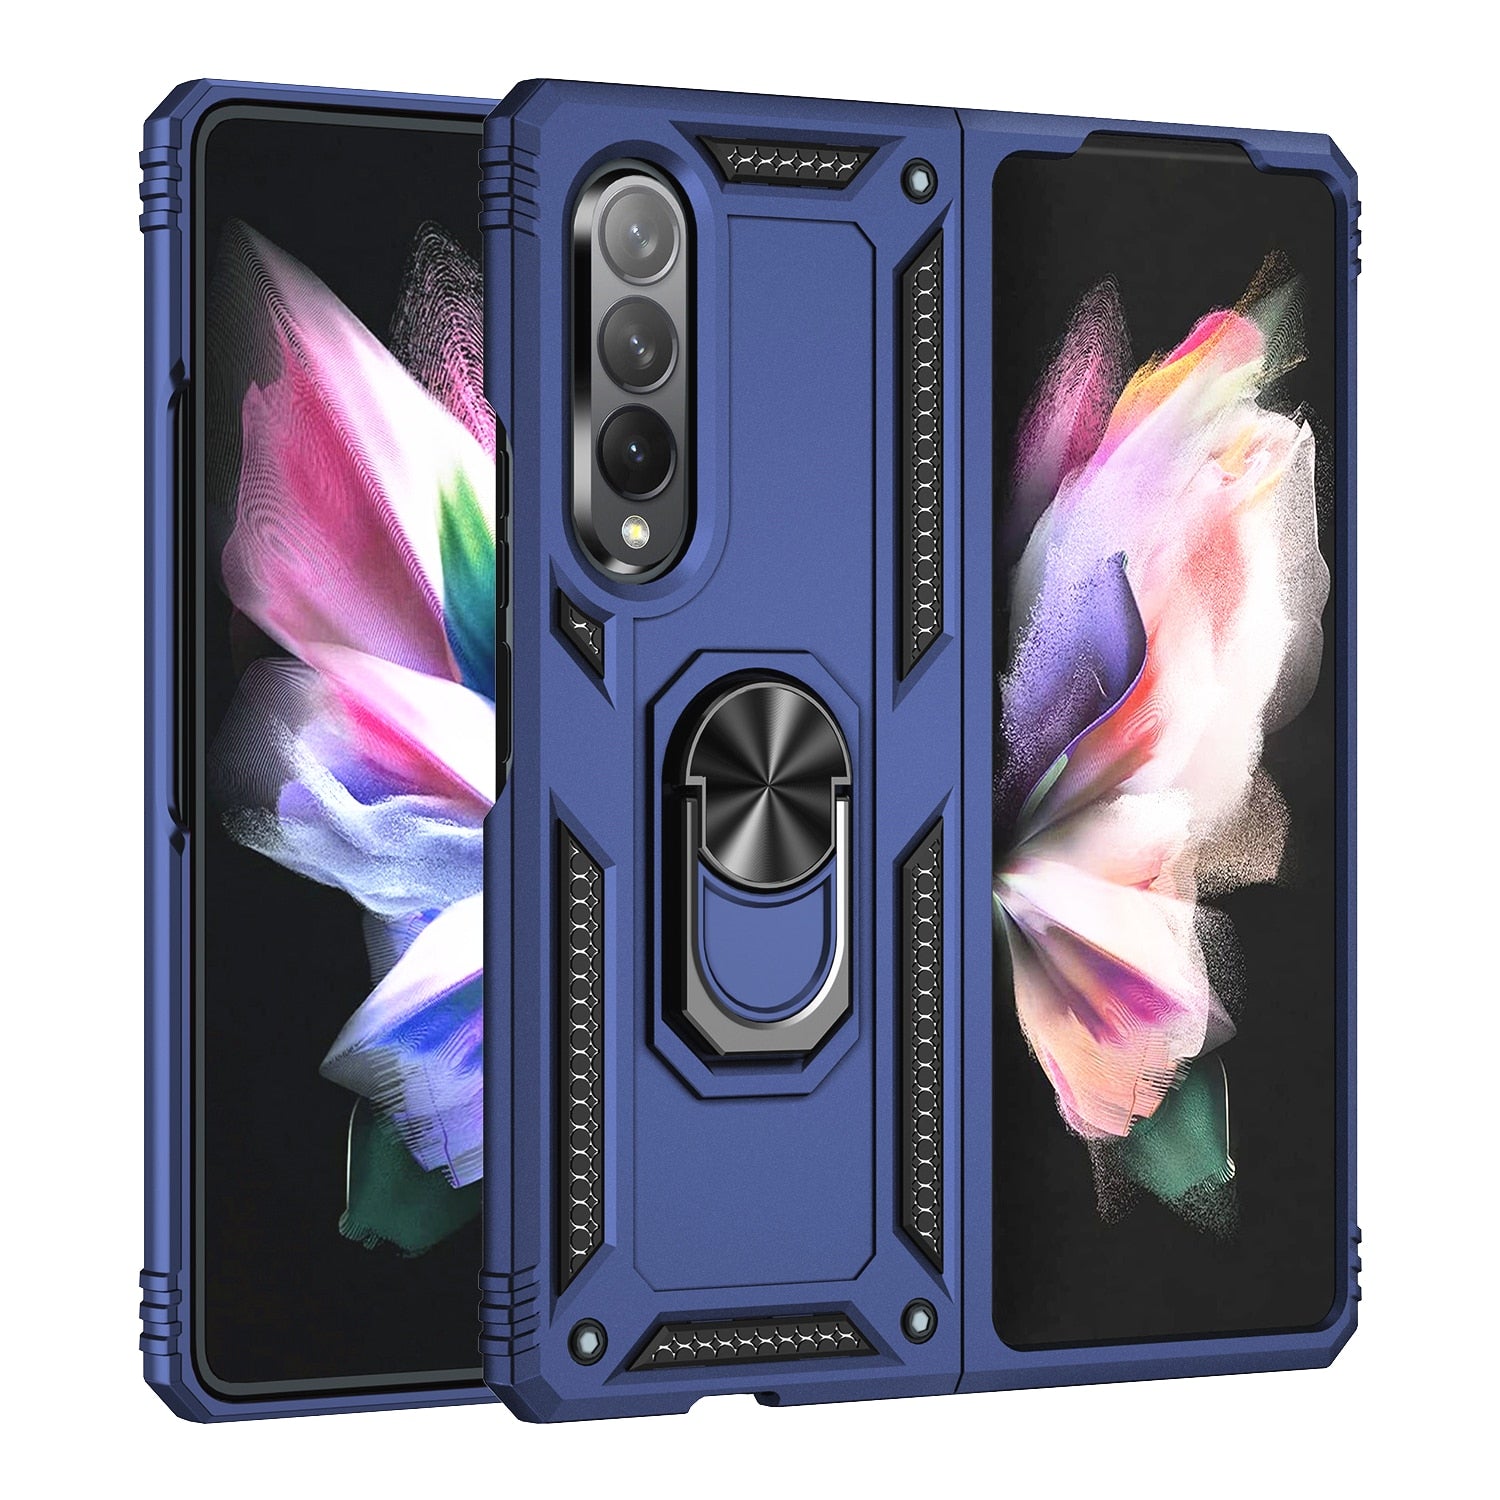 Dual Layer Kickstand Ring Holder Case for Samsung Galaxy Z Fold